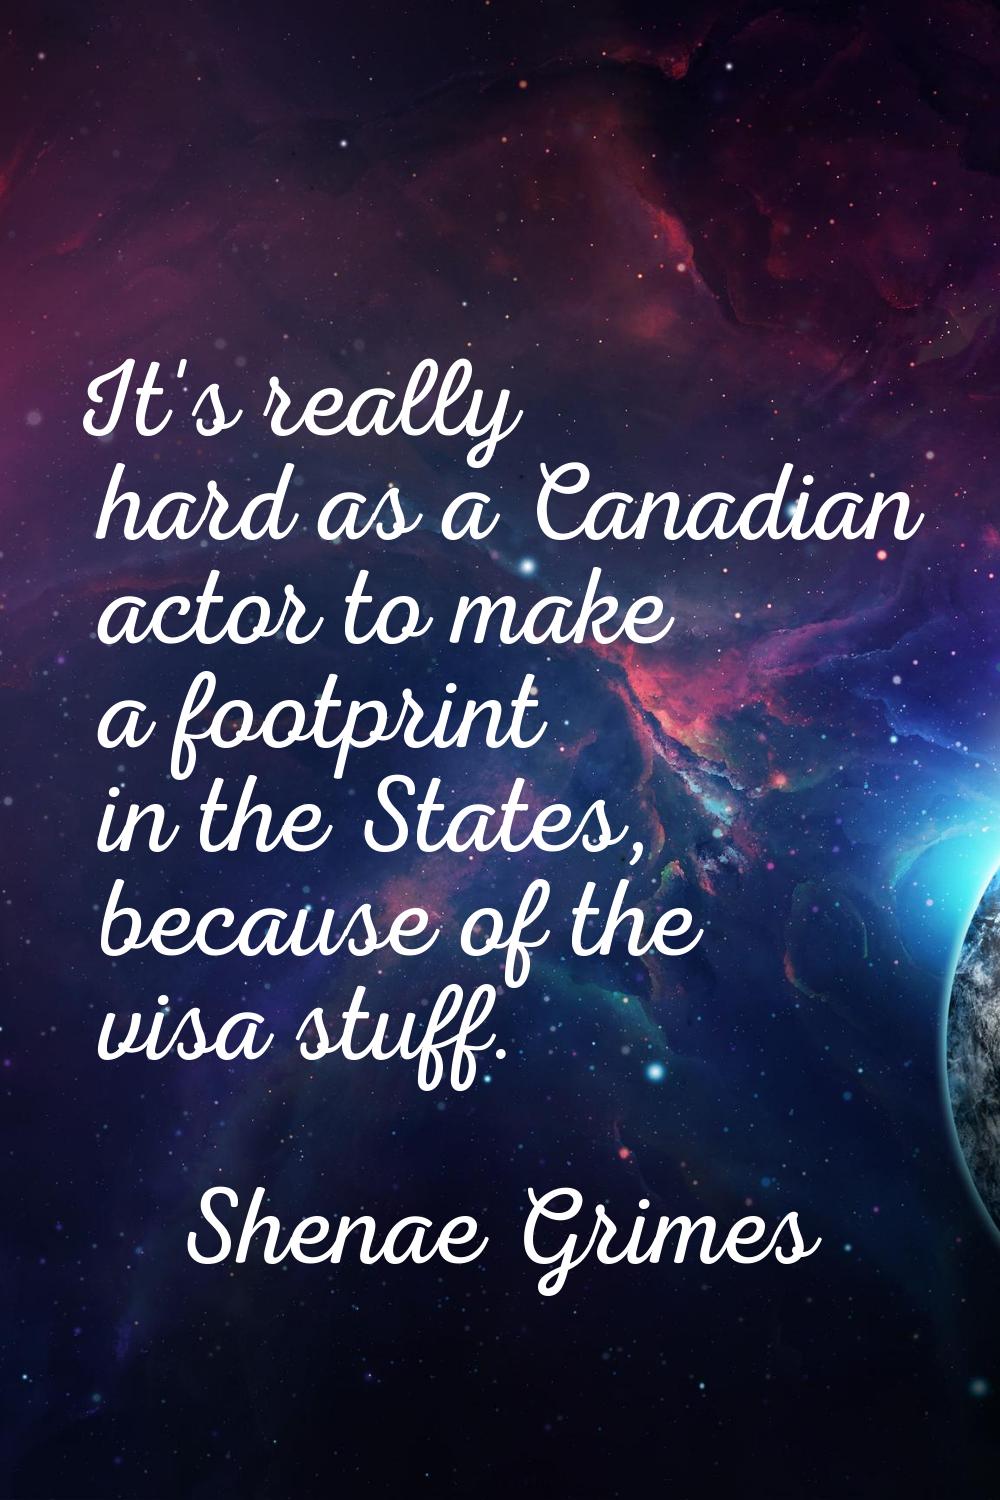 It's really hard as a Canadian actor to make a footprint in the States, because of the visa stuff.